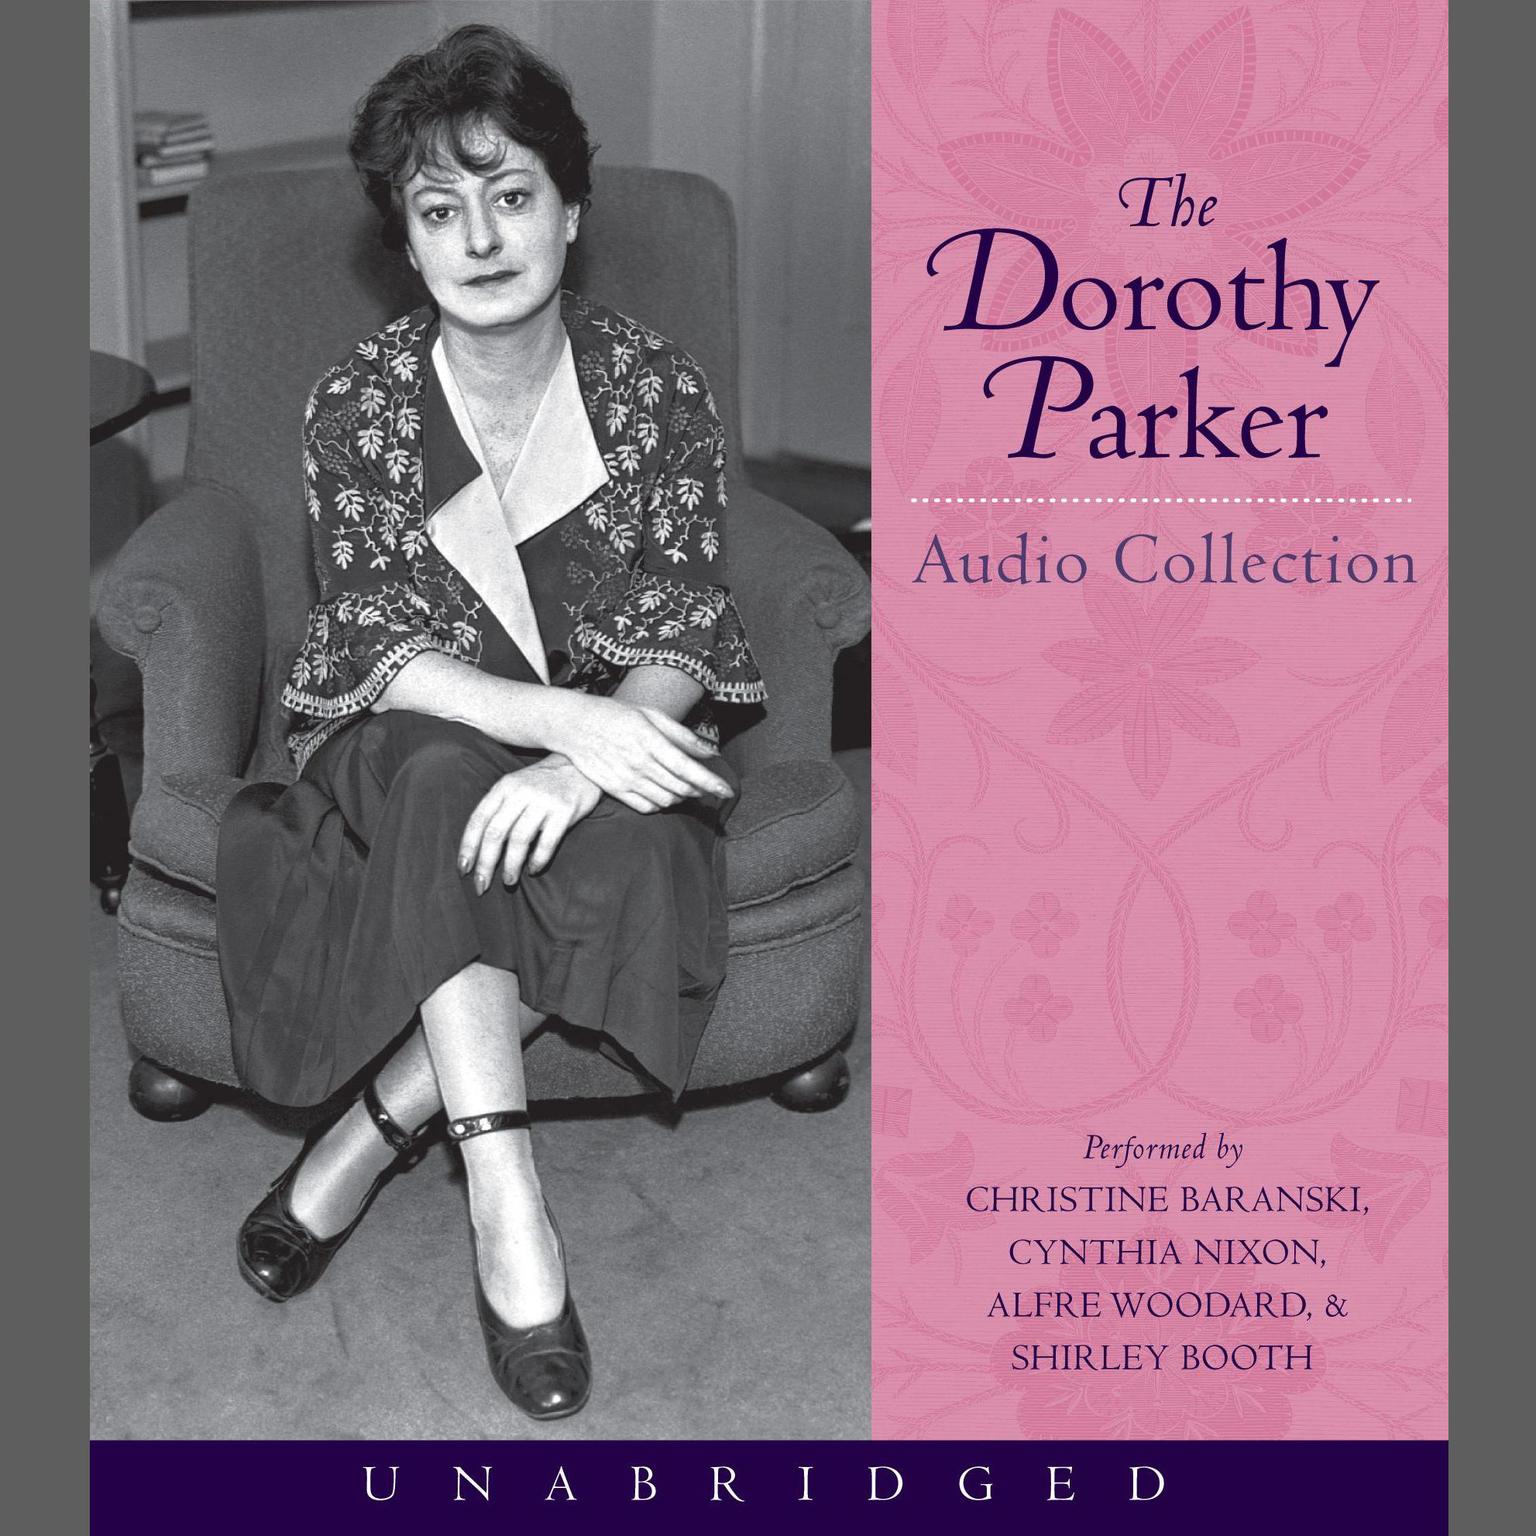 The Dorothy Parker Audio Collection (Abridged) Audiobook, by Dorothy Parker